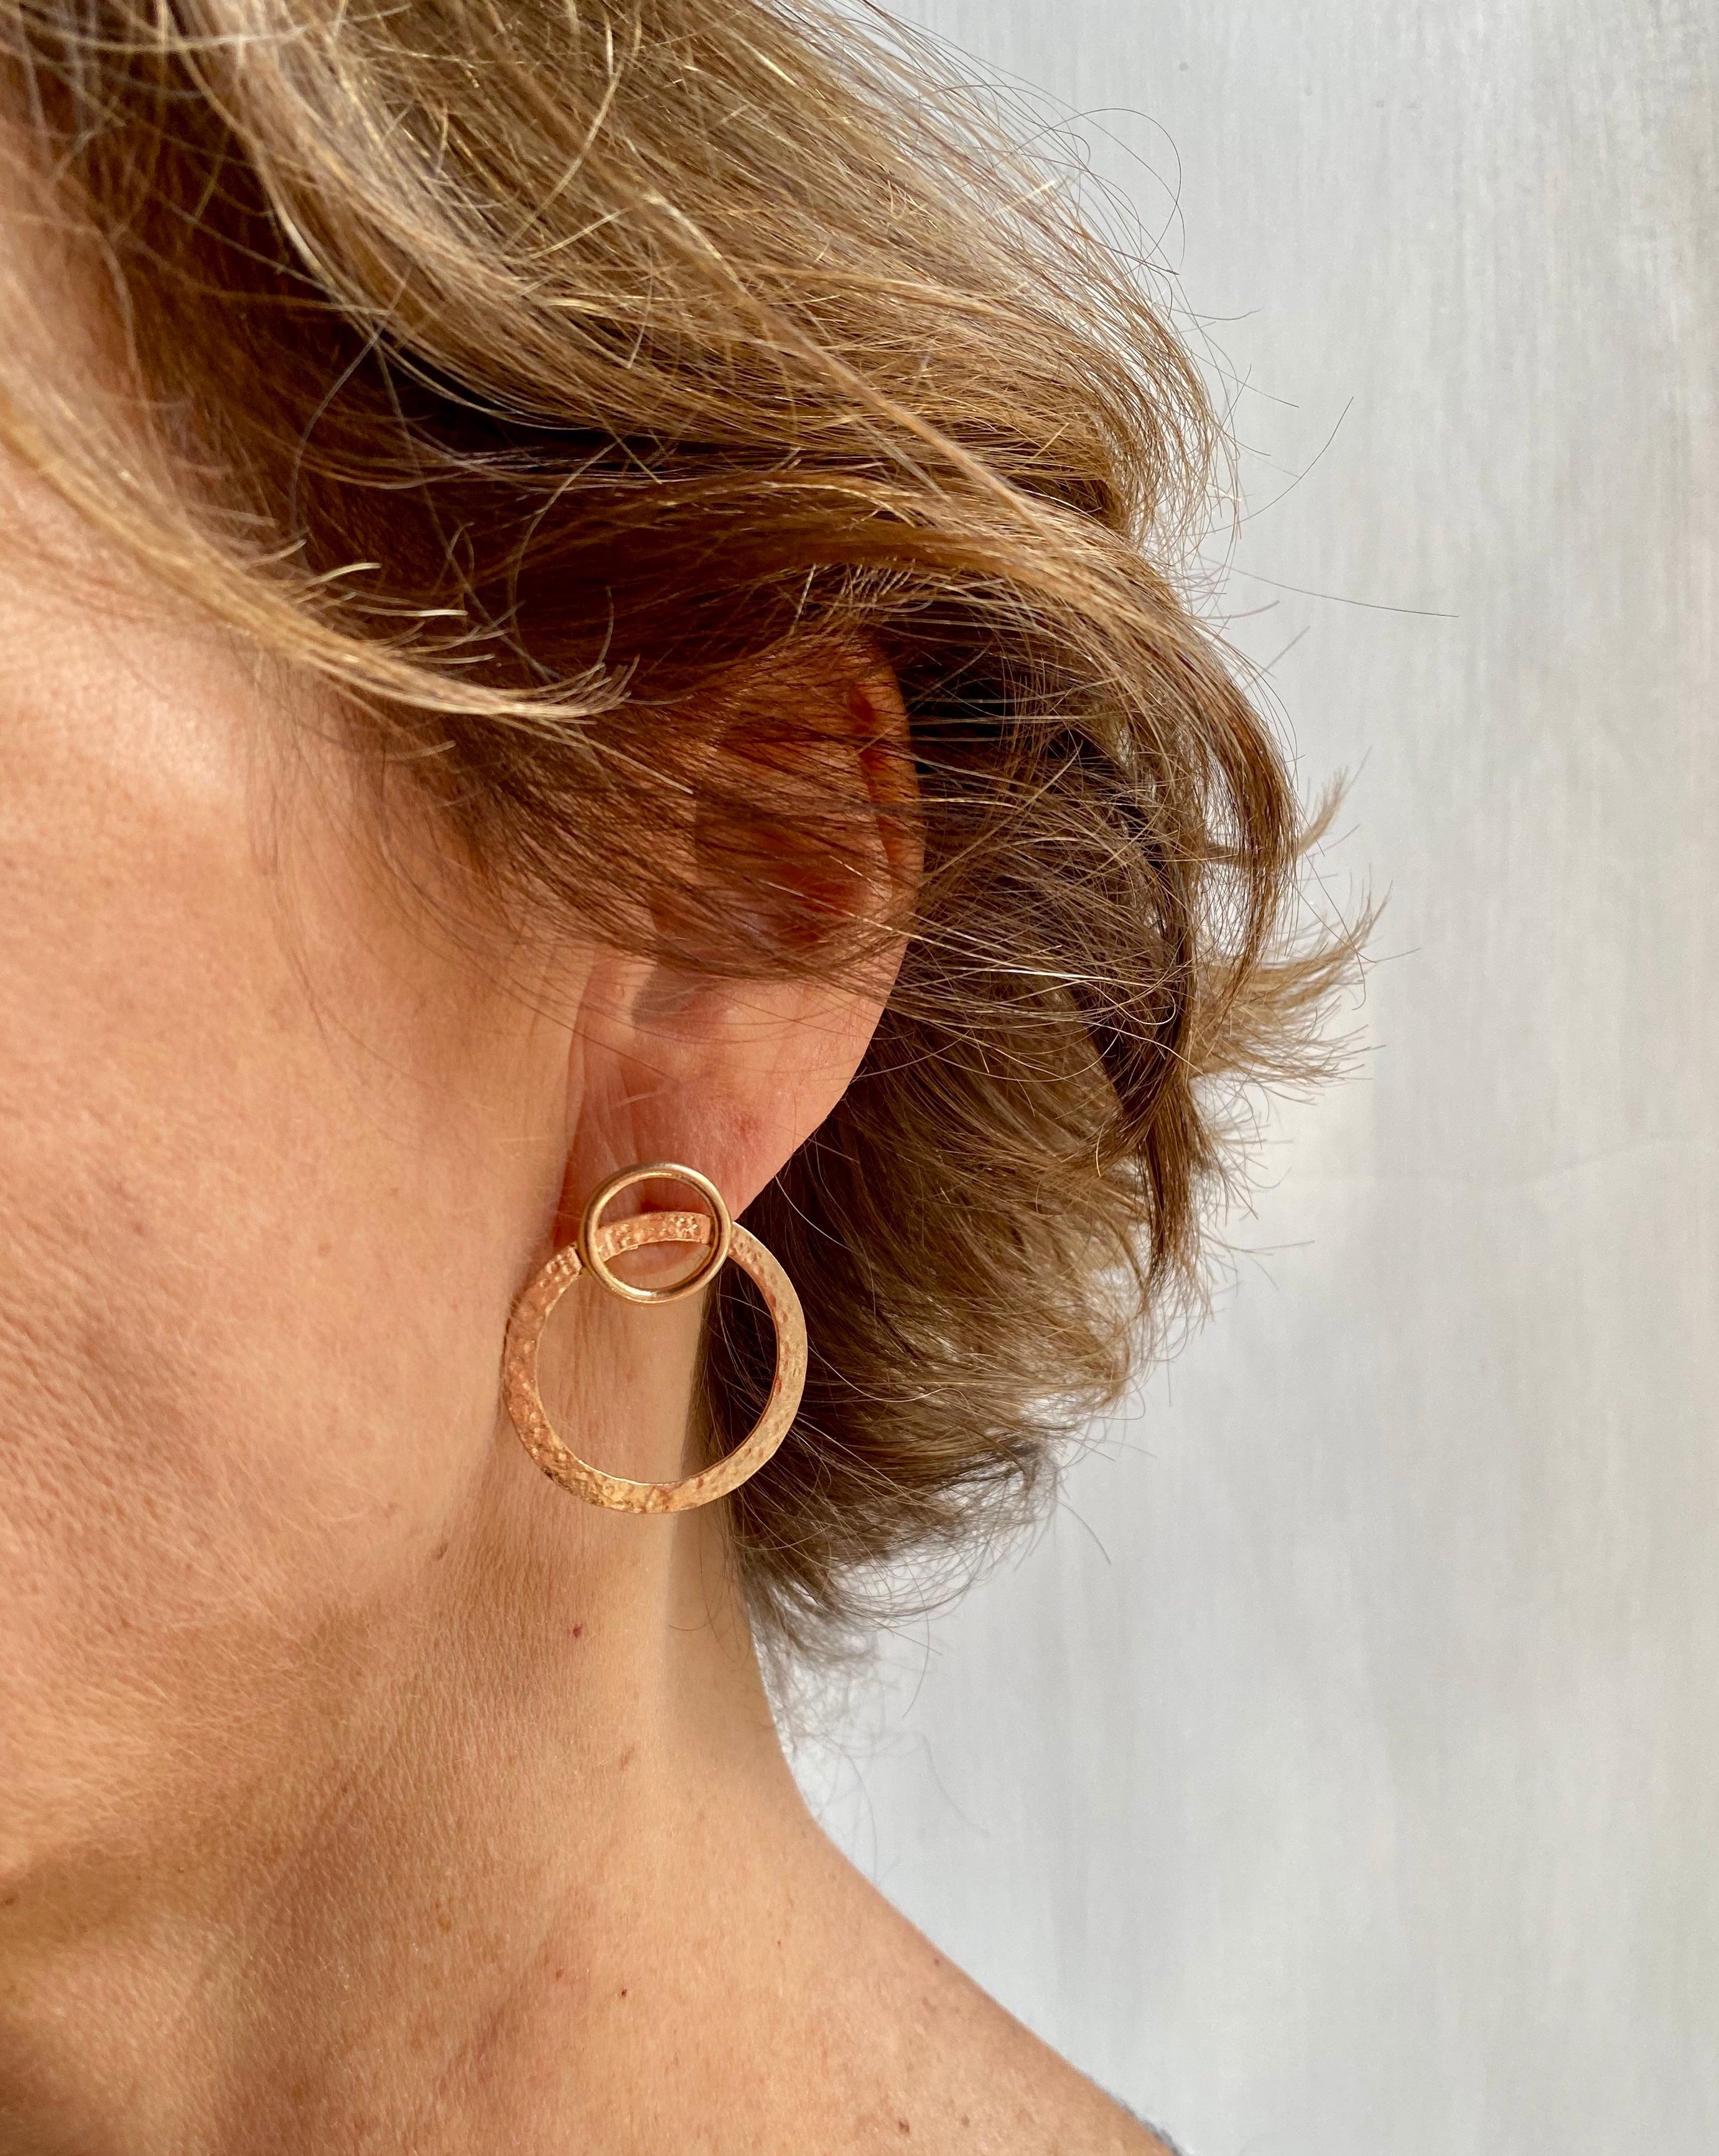 Rossella Ugolini Design Collection Hammered 18 Karats Yellow Gold Open Hoop Circle Artisan Modern Earrings.
These hand-hammered double open circles are easy wearable. The first circle rests on the lobe and crosses with the second largest hammered